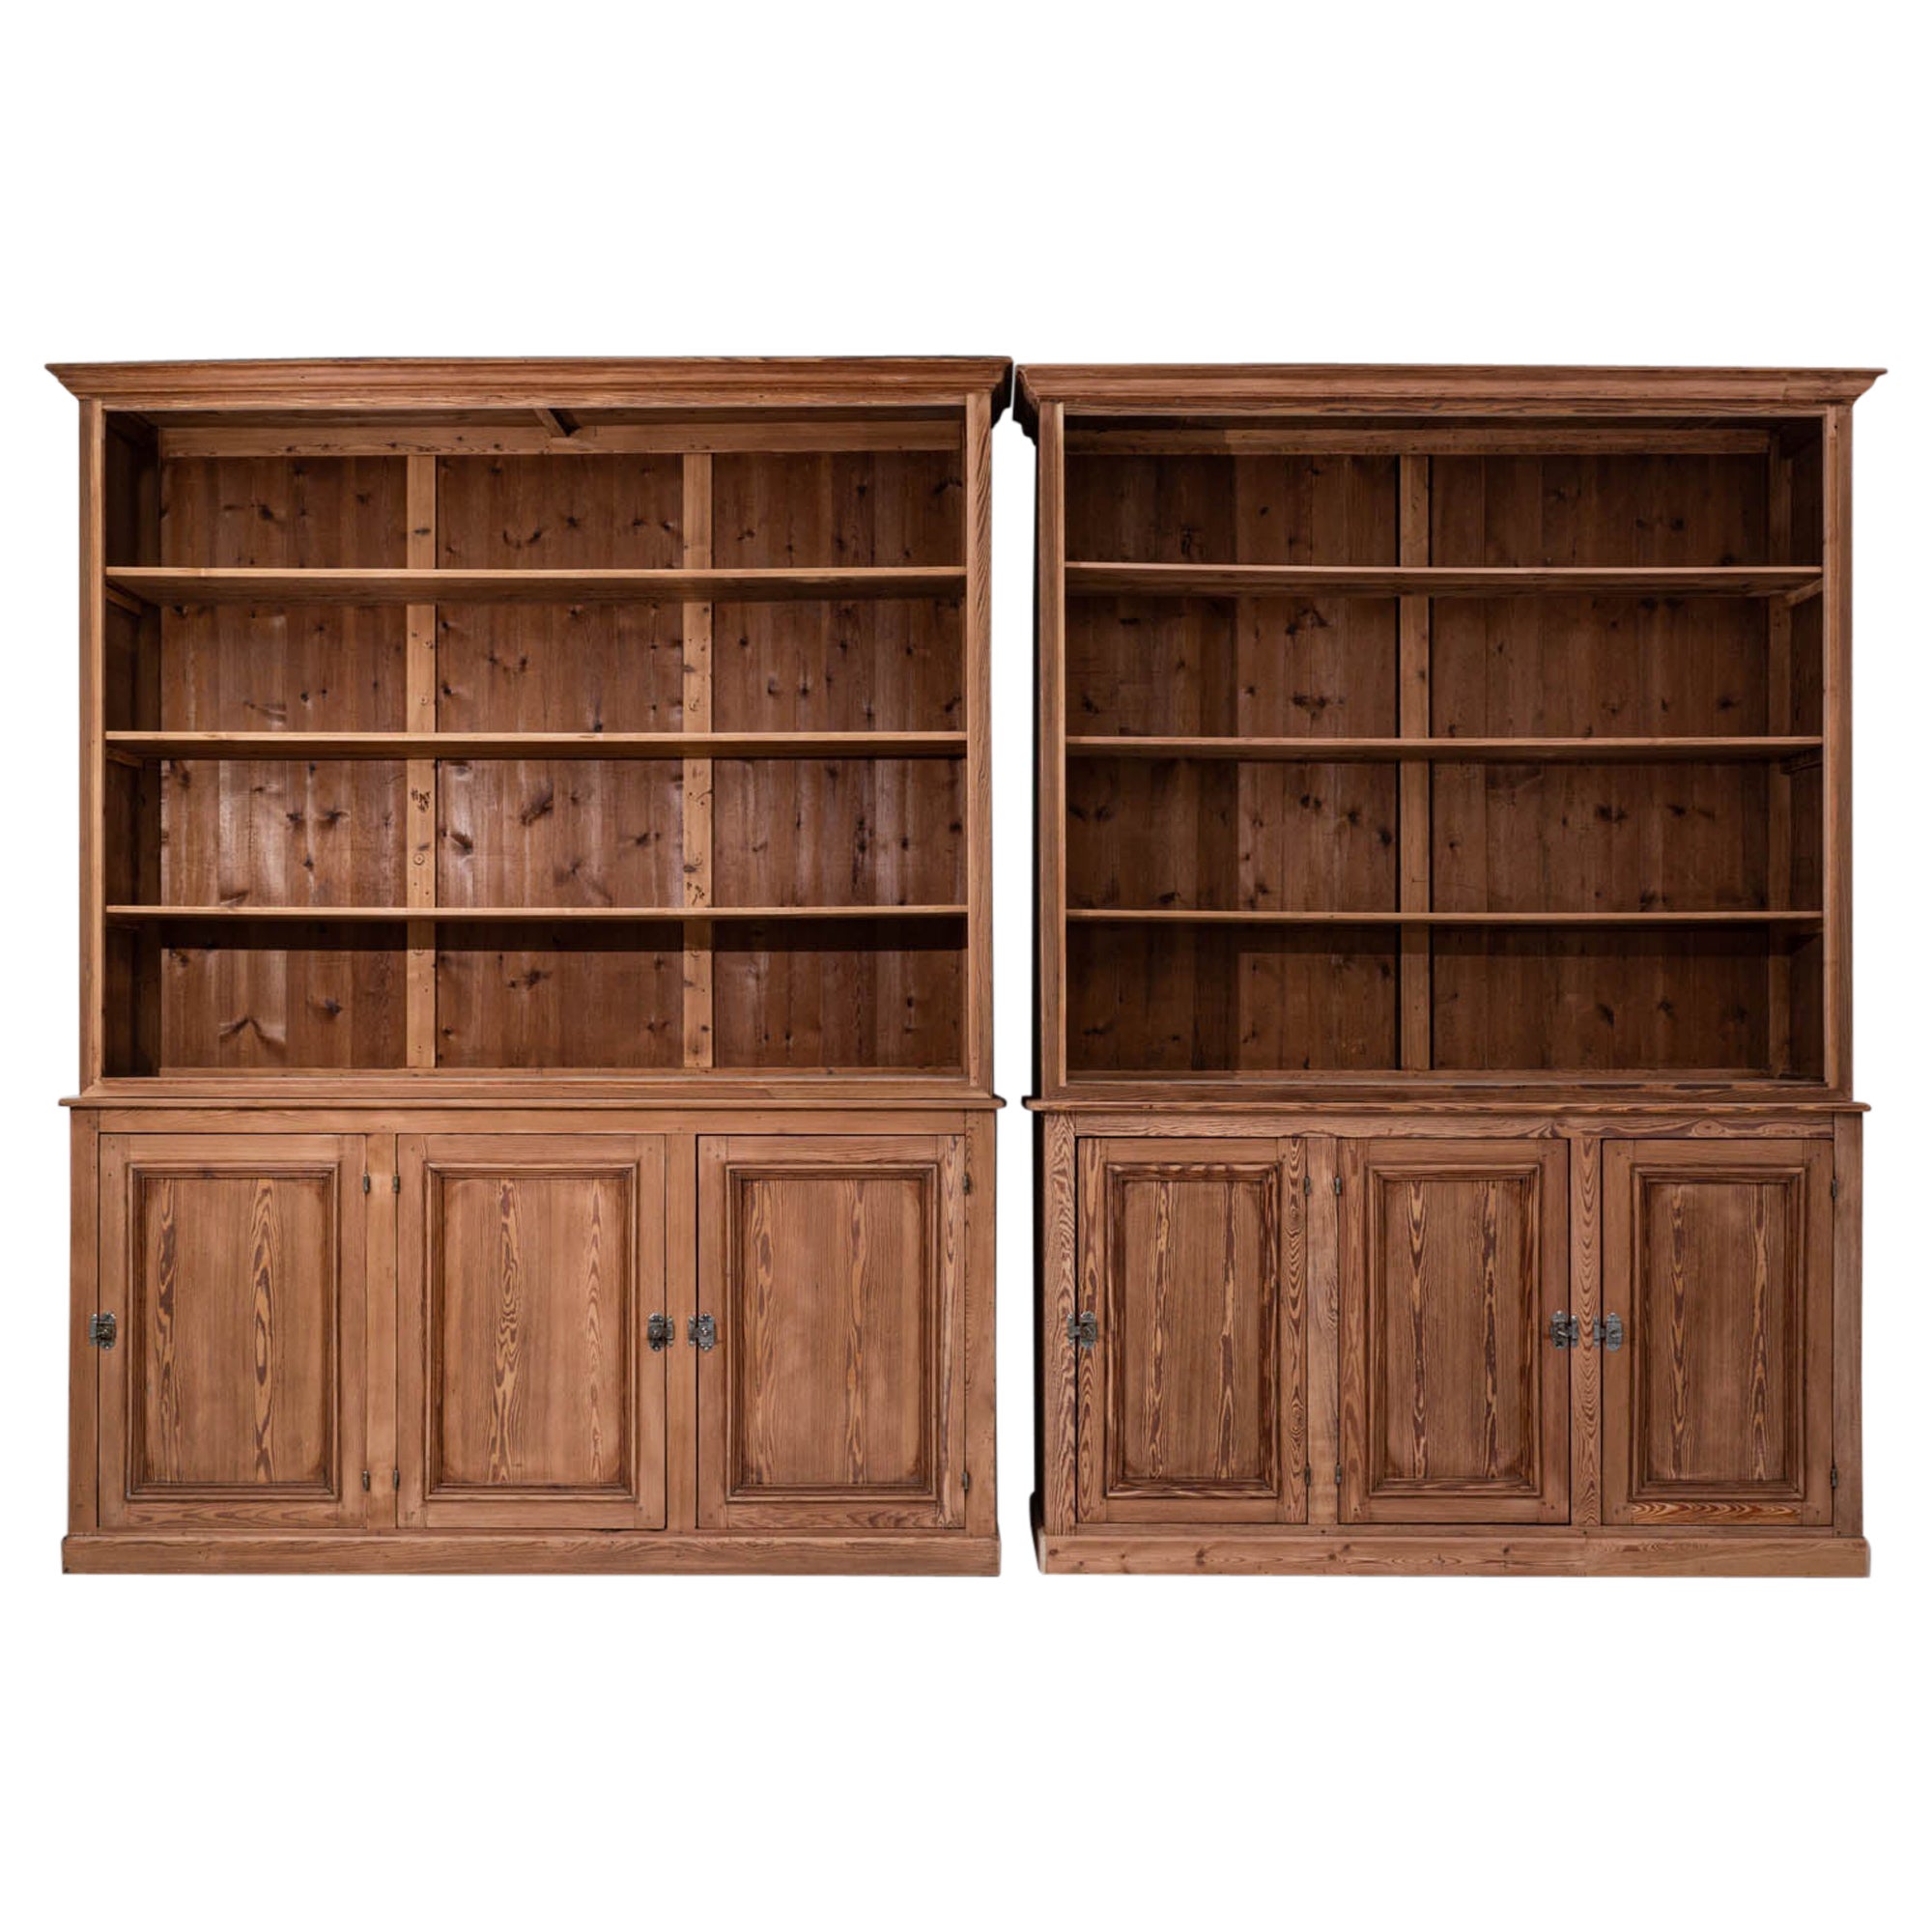 Turn of the Century French Wooden Library Cabinets, a Pair